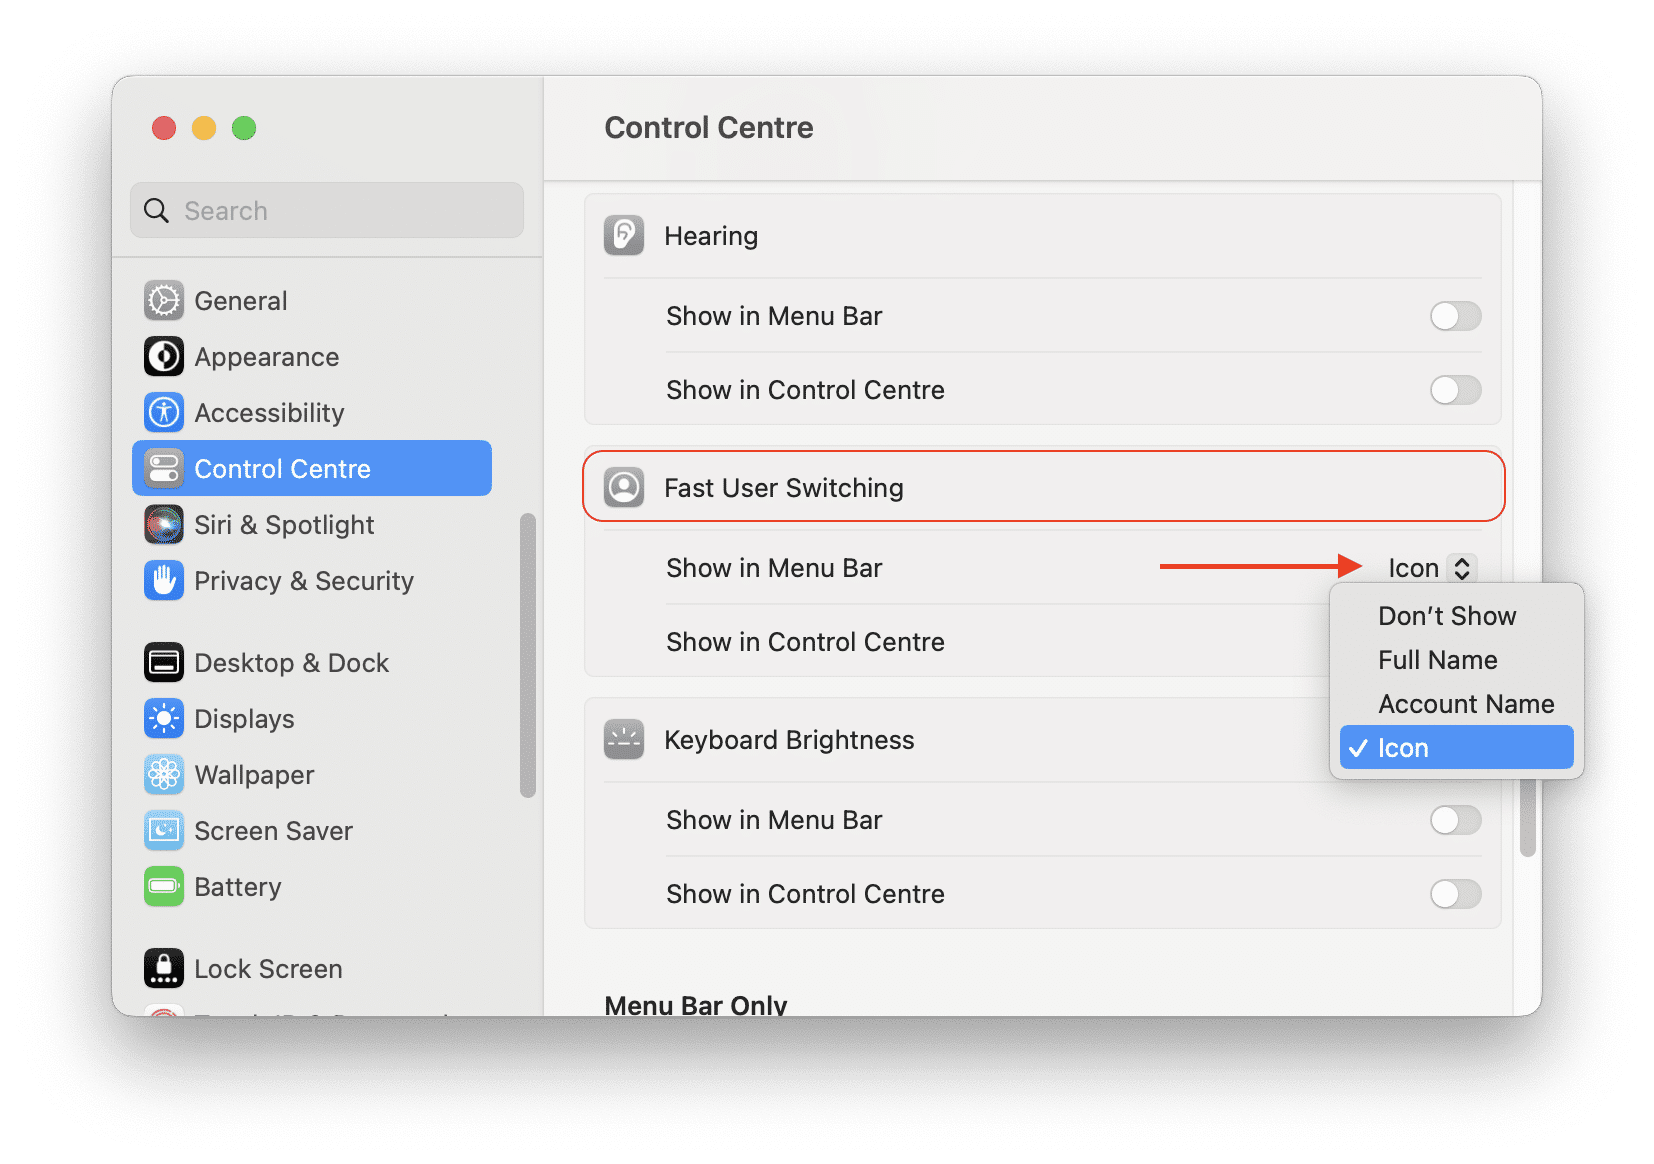 System Settings showing Control Centre